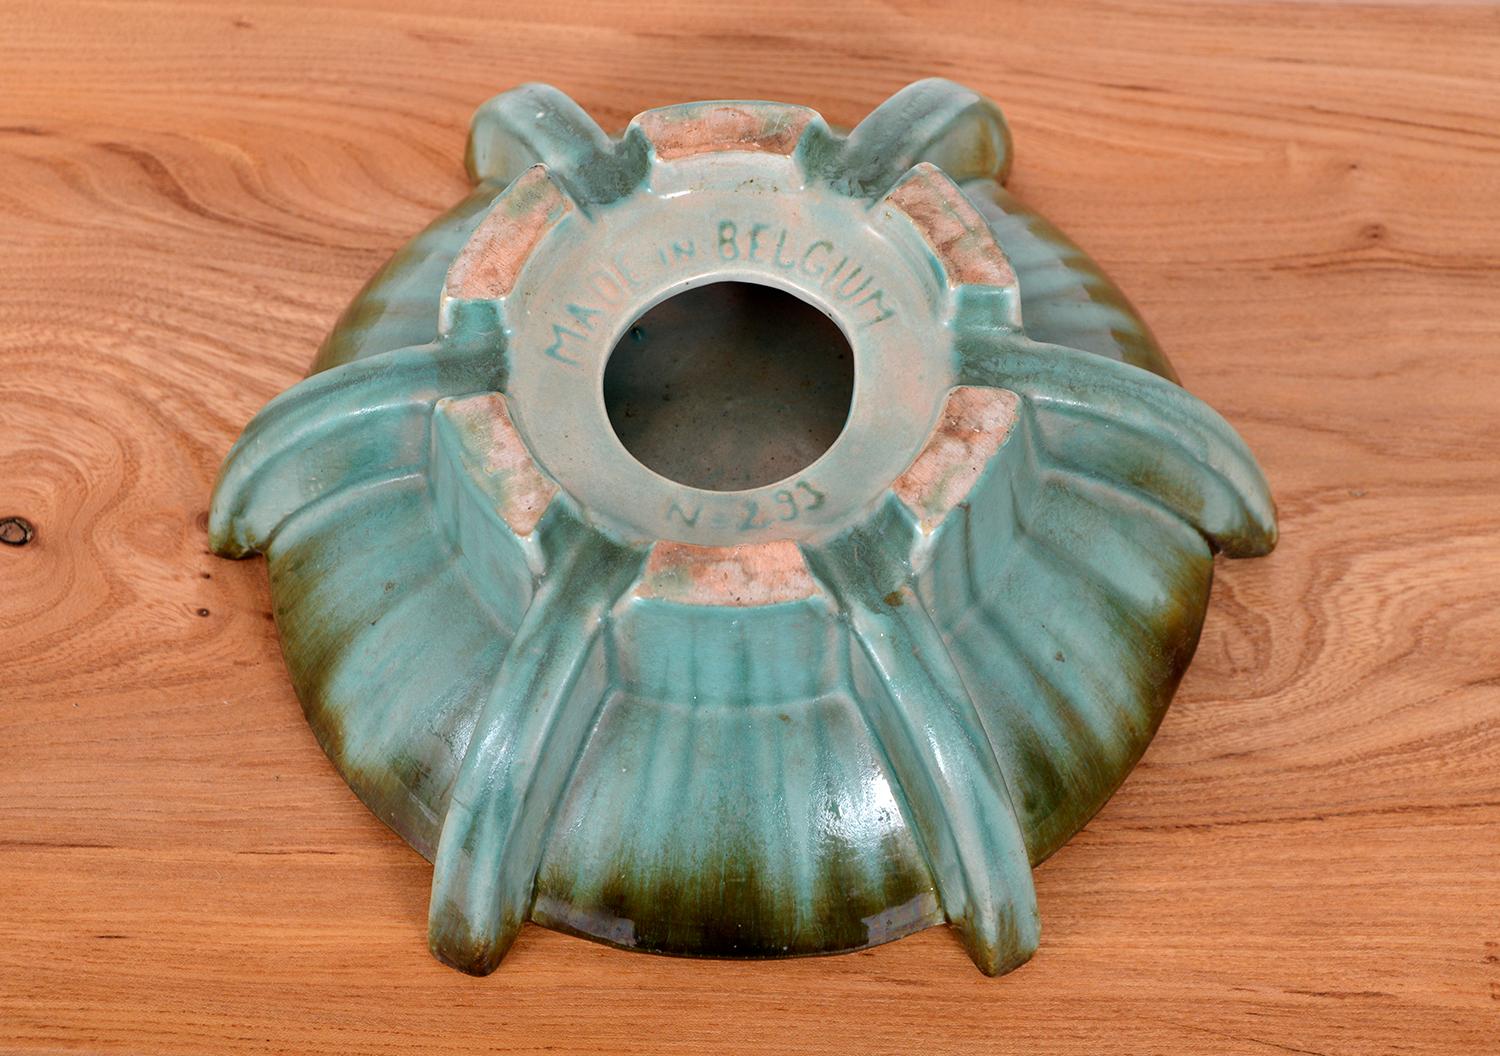 1930s Art Deco Modernist Faience Tazza by Thulin Pottery Belgium Centrepiece For Sale 2